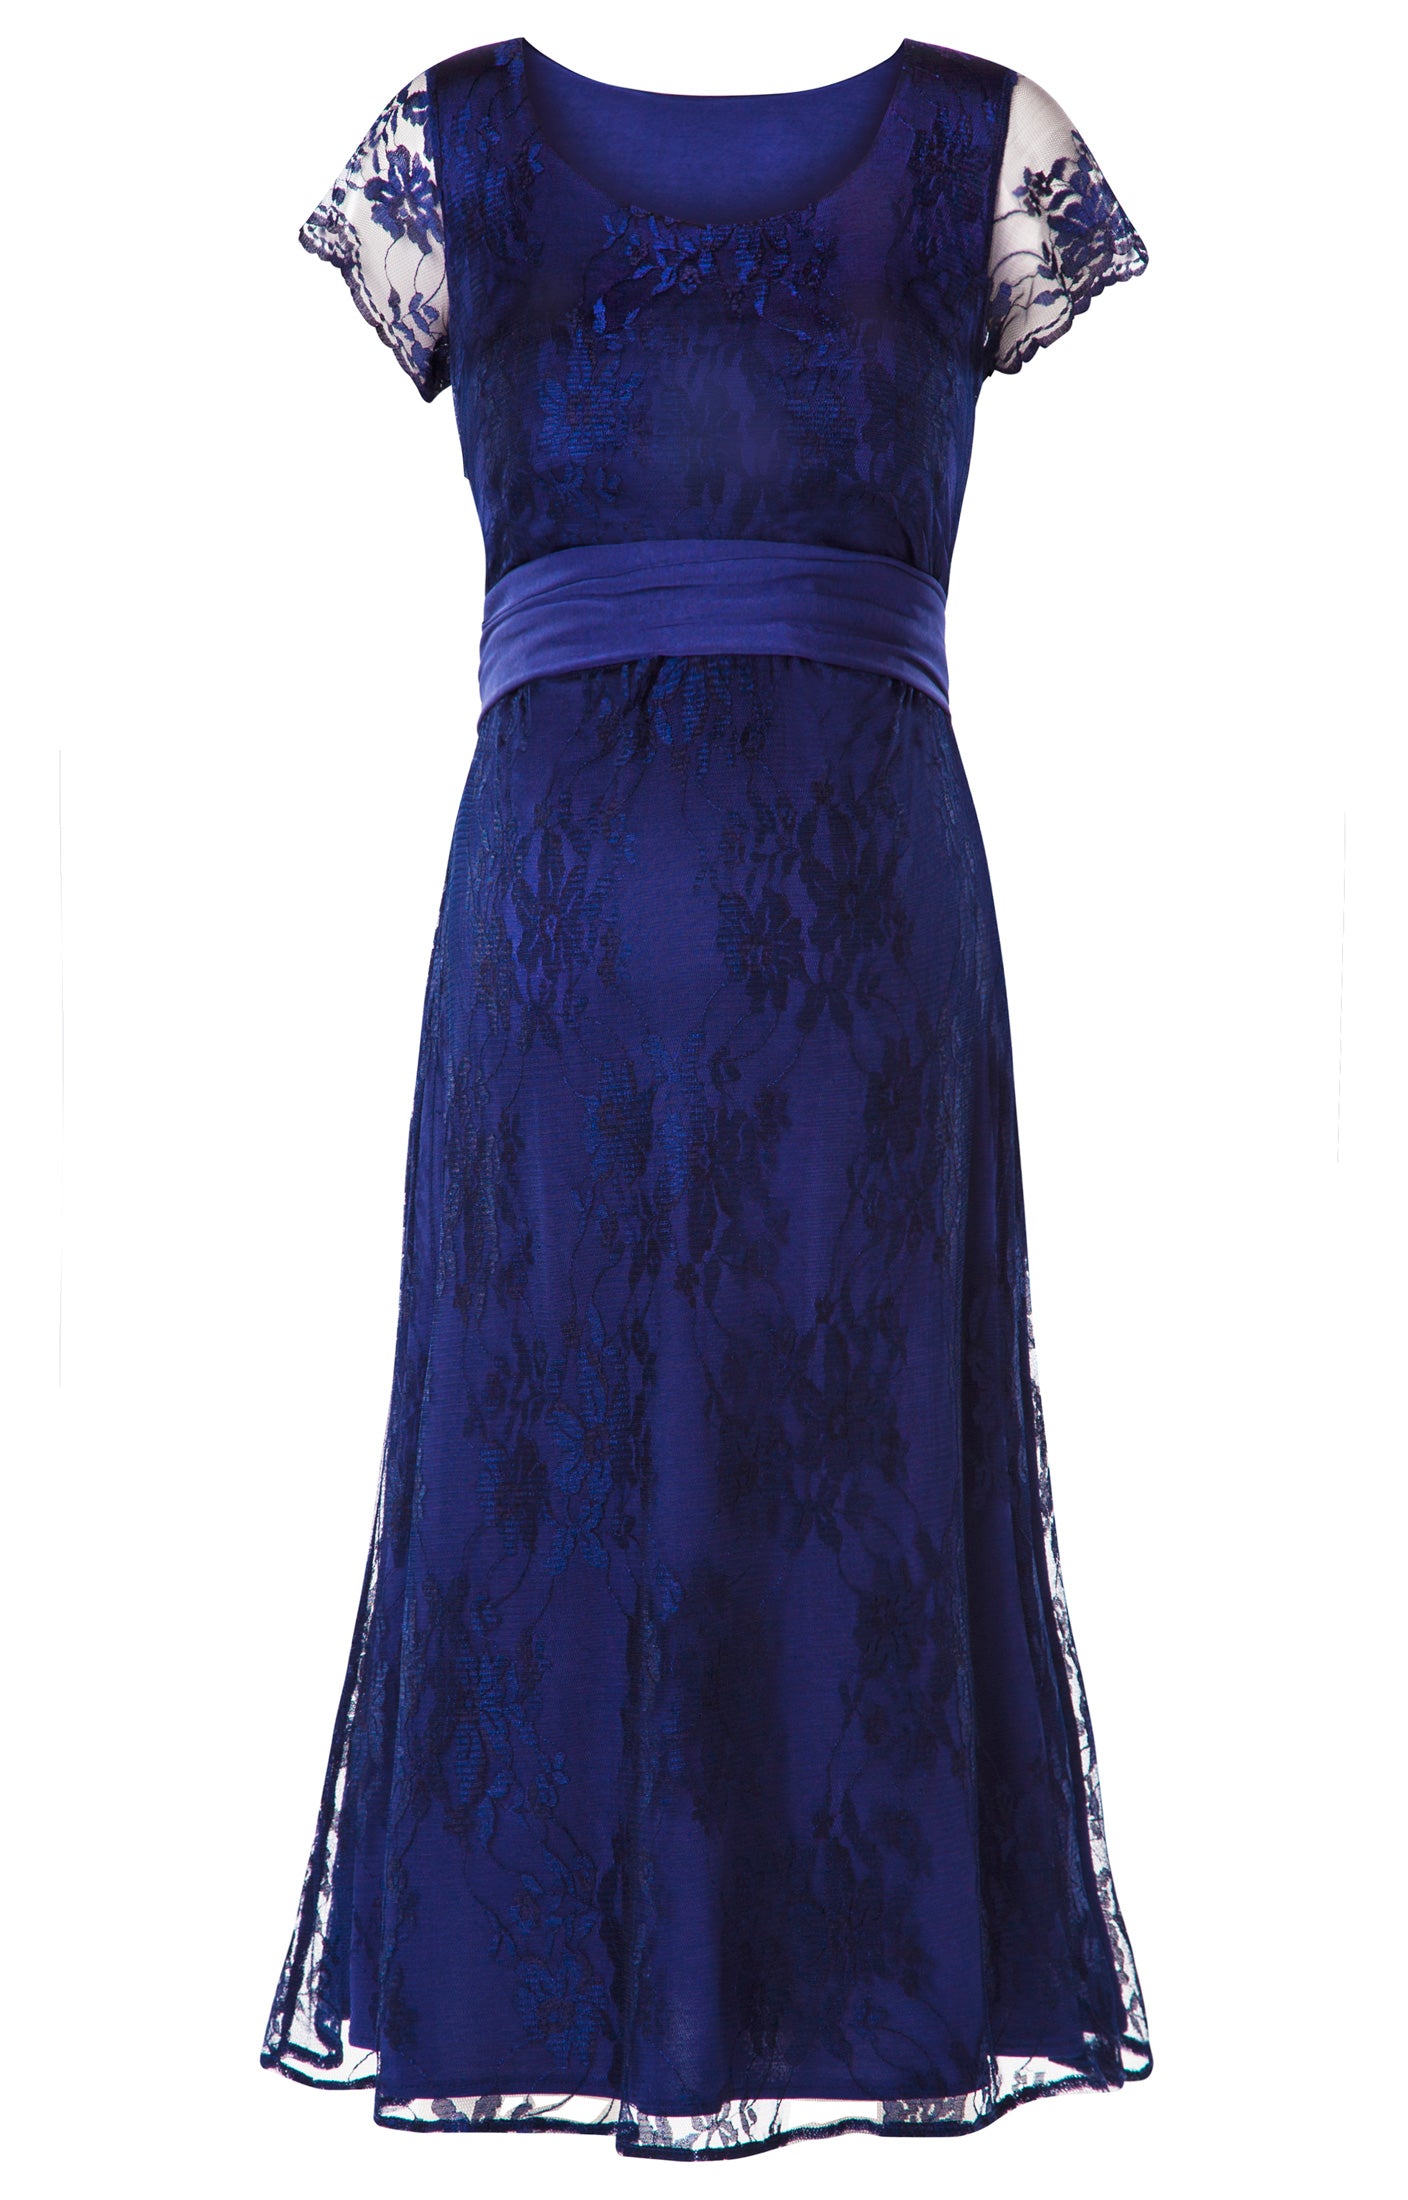 Amelia Maternity Lace Dress in Navy - Maternity Wedding Dresses, Evening  Wear and Party Clothes by Tiffany Rose UK